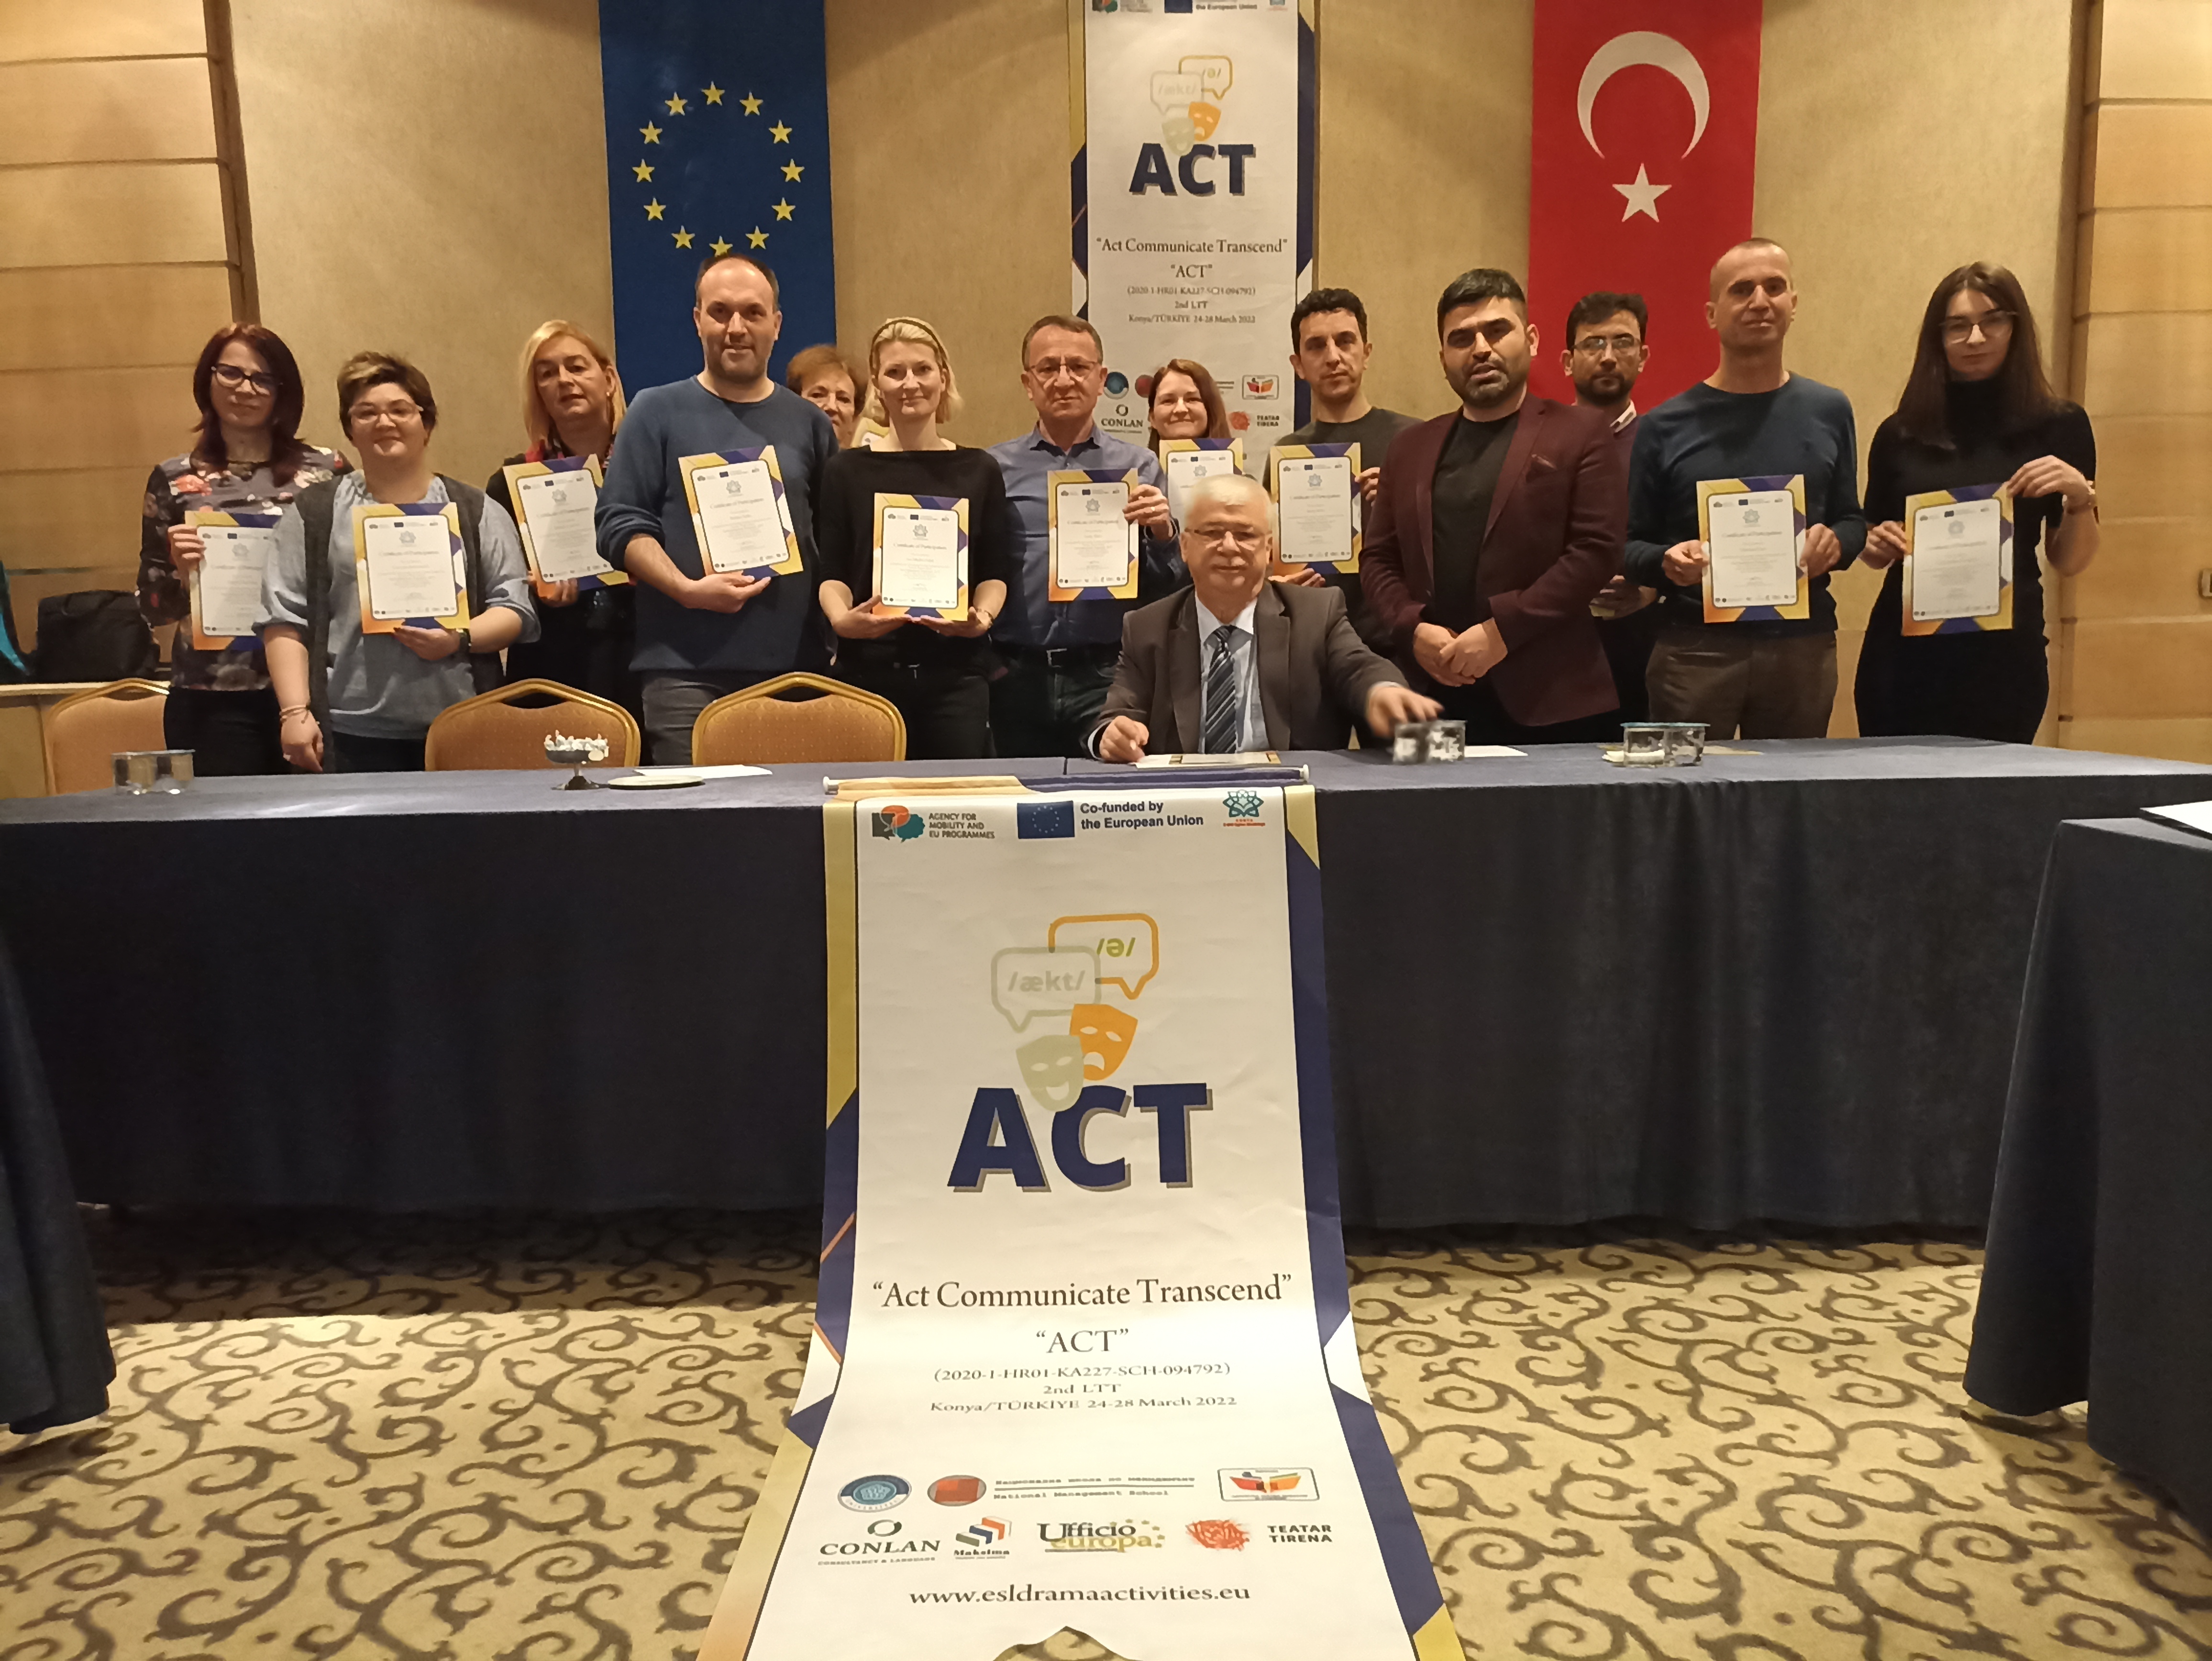 2ND LTT - ACT: Act Communicate Transcend Project's 2nd Learning Teaching Training Activity in Konya, Turkey